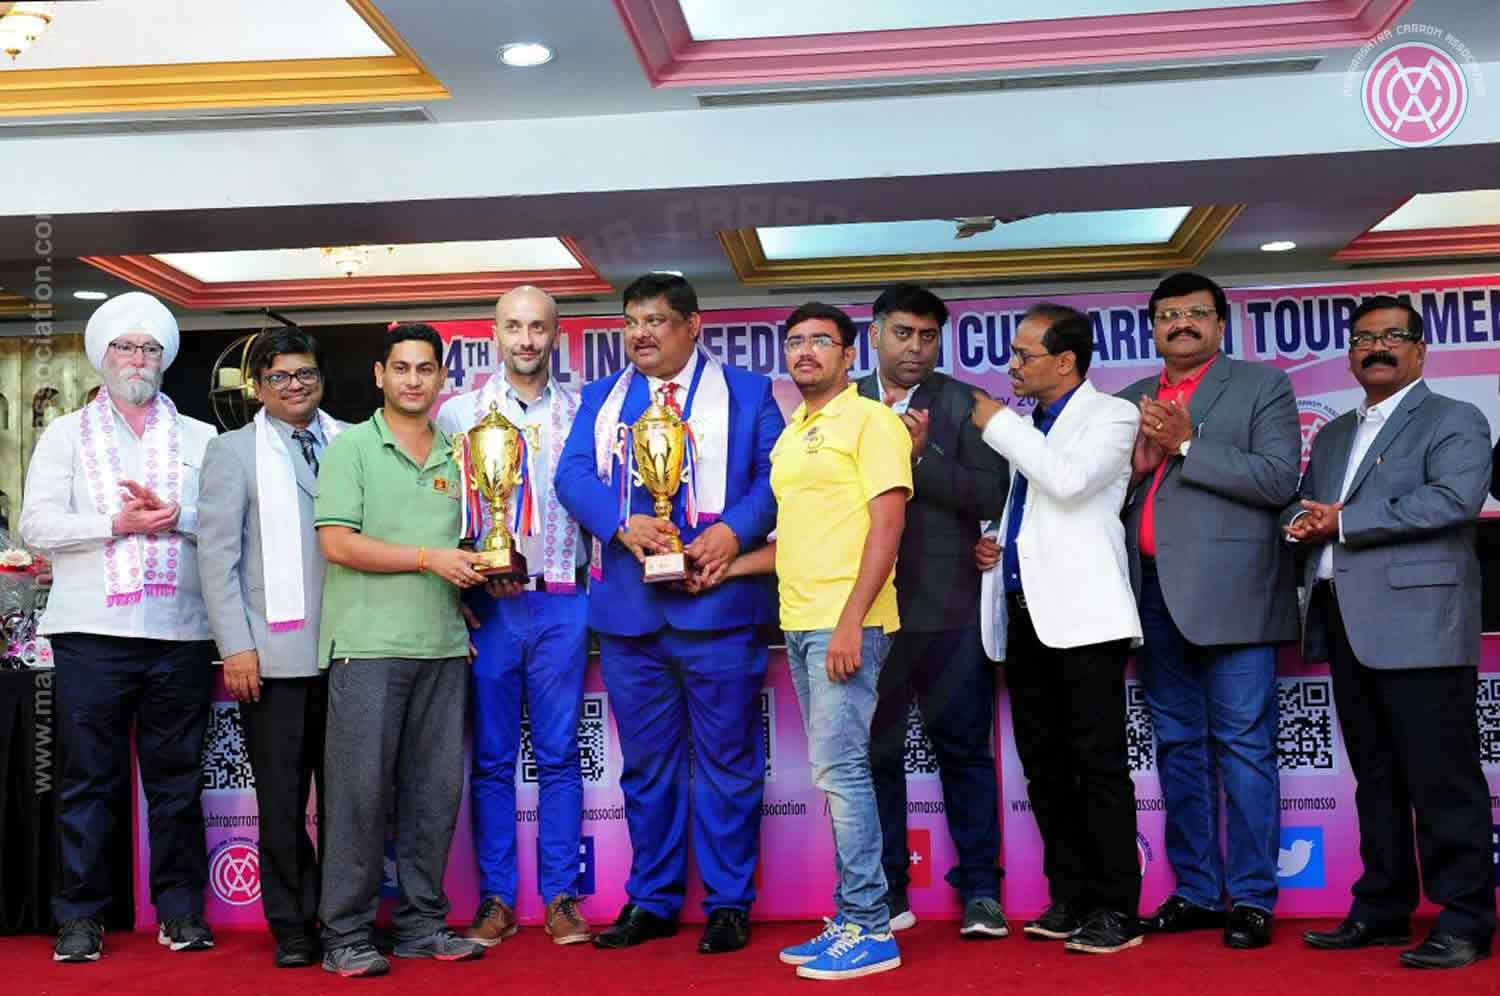 24th All India Federation Cup Carrom Tournament : 2017 - 2018